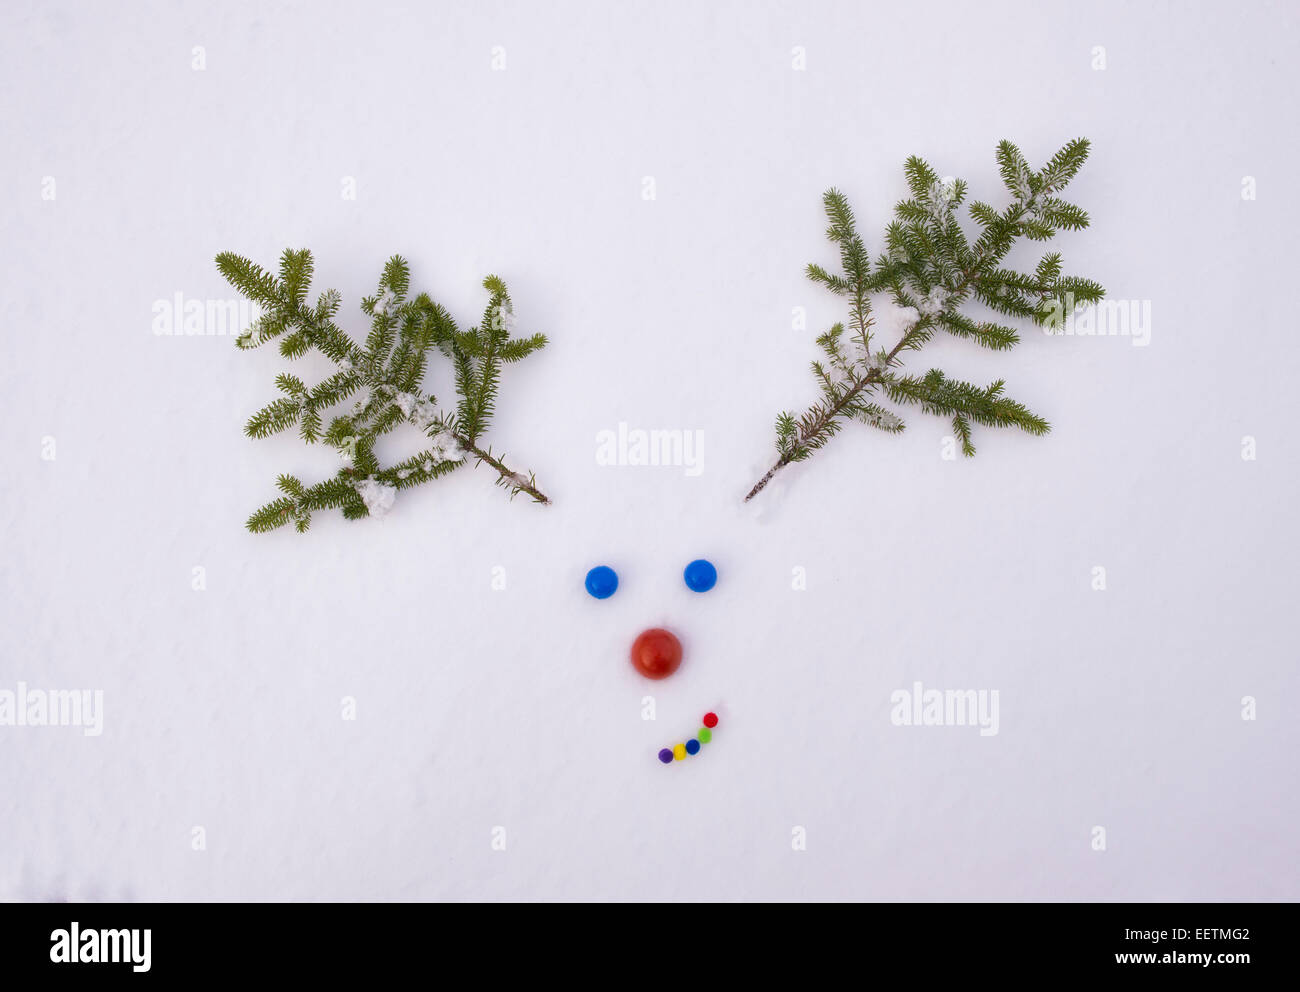 Rudolf the red nose reindeer face in the snow Stock Photo